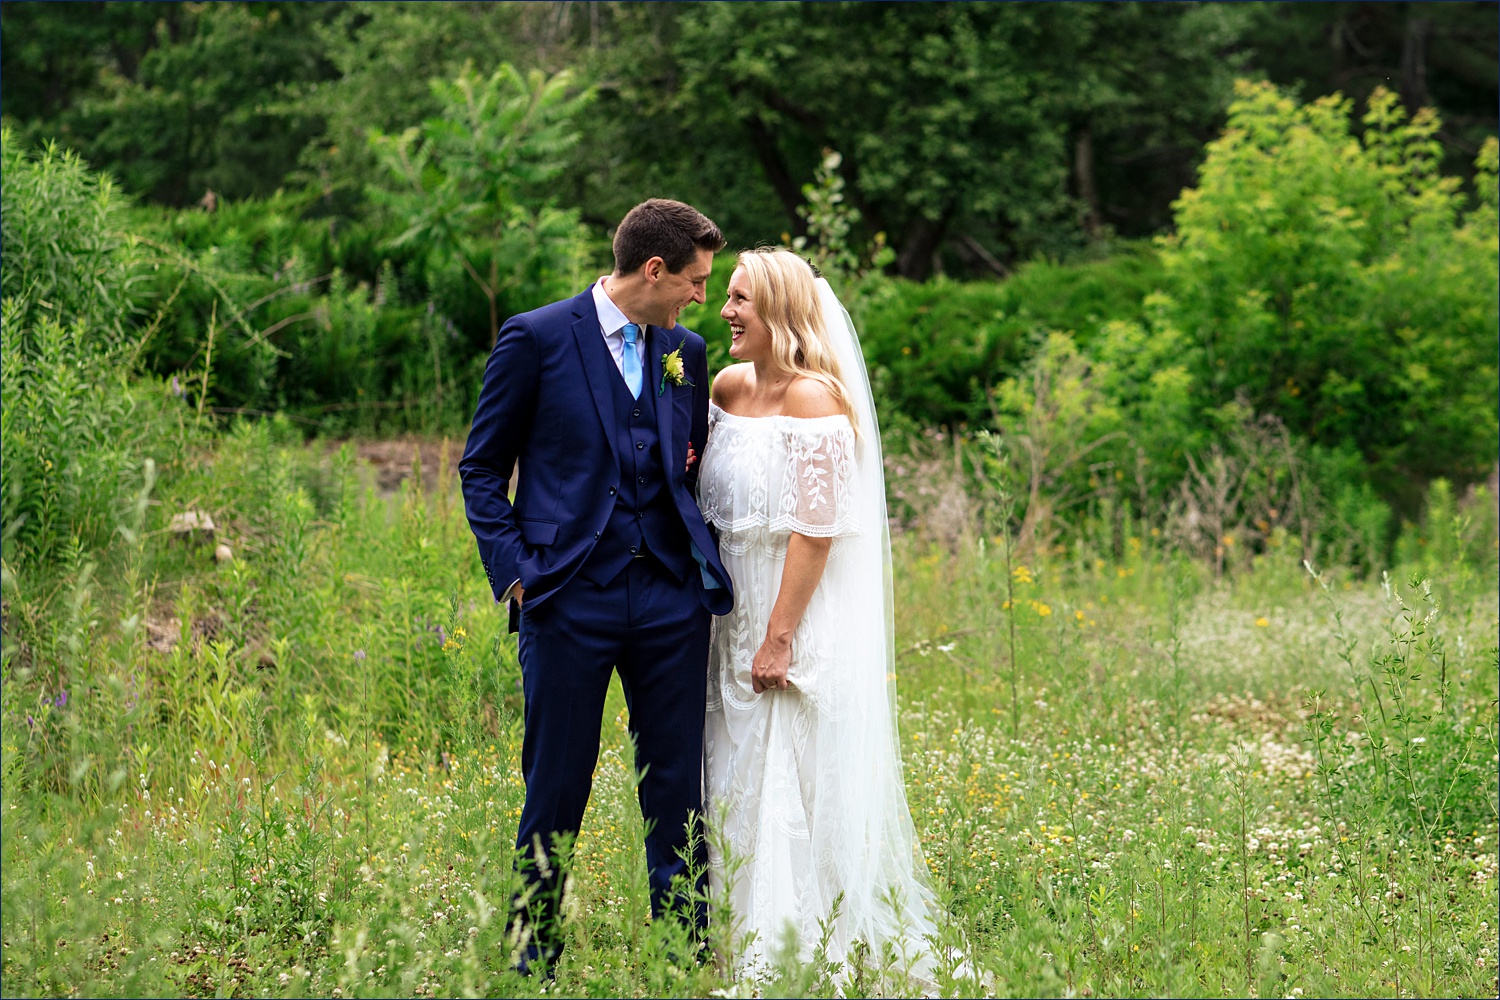 A wildflower field and the newlyweds smiling at their NH wedding day